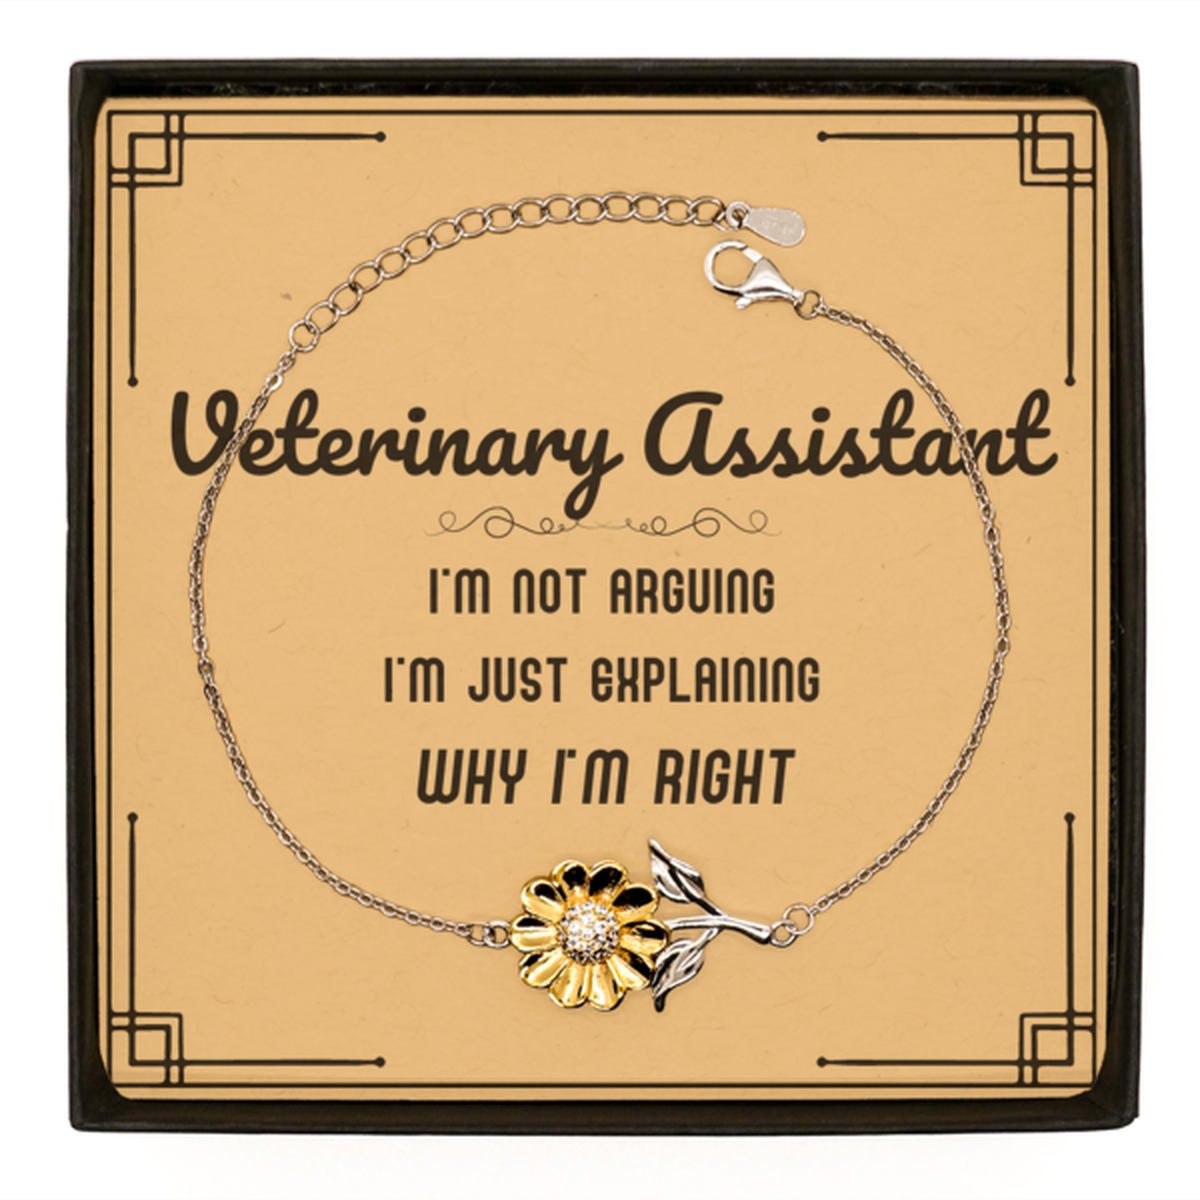 Veterinary Assistant I'm not Arguing. I'm Just Explaining Why I'm RIGHT Sunflower Bracelet, Funny Saying Quote Veterinary Assistant Gifts For Veterinary Assistant Message Card Graduation Birthday Christmas Gifts for Men Women Coworker